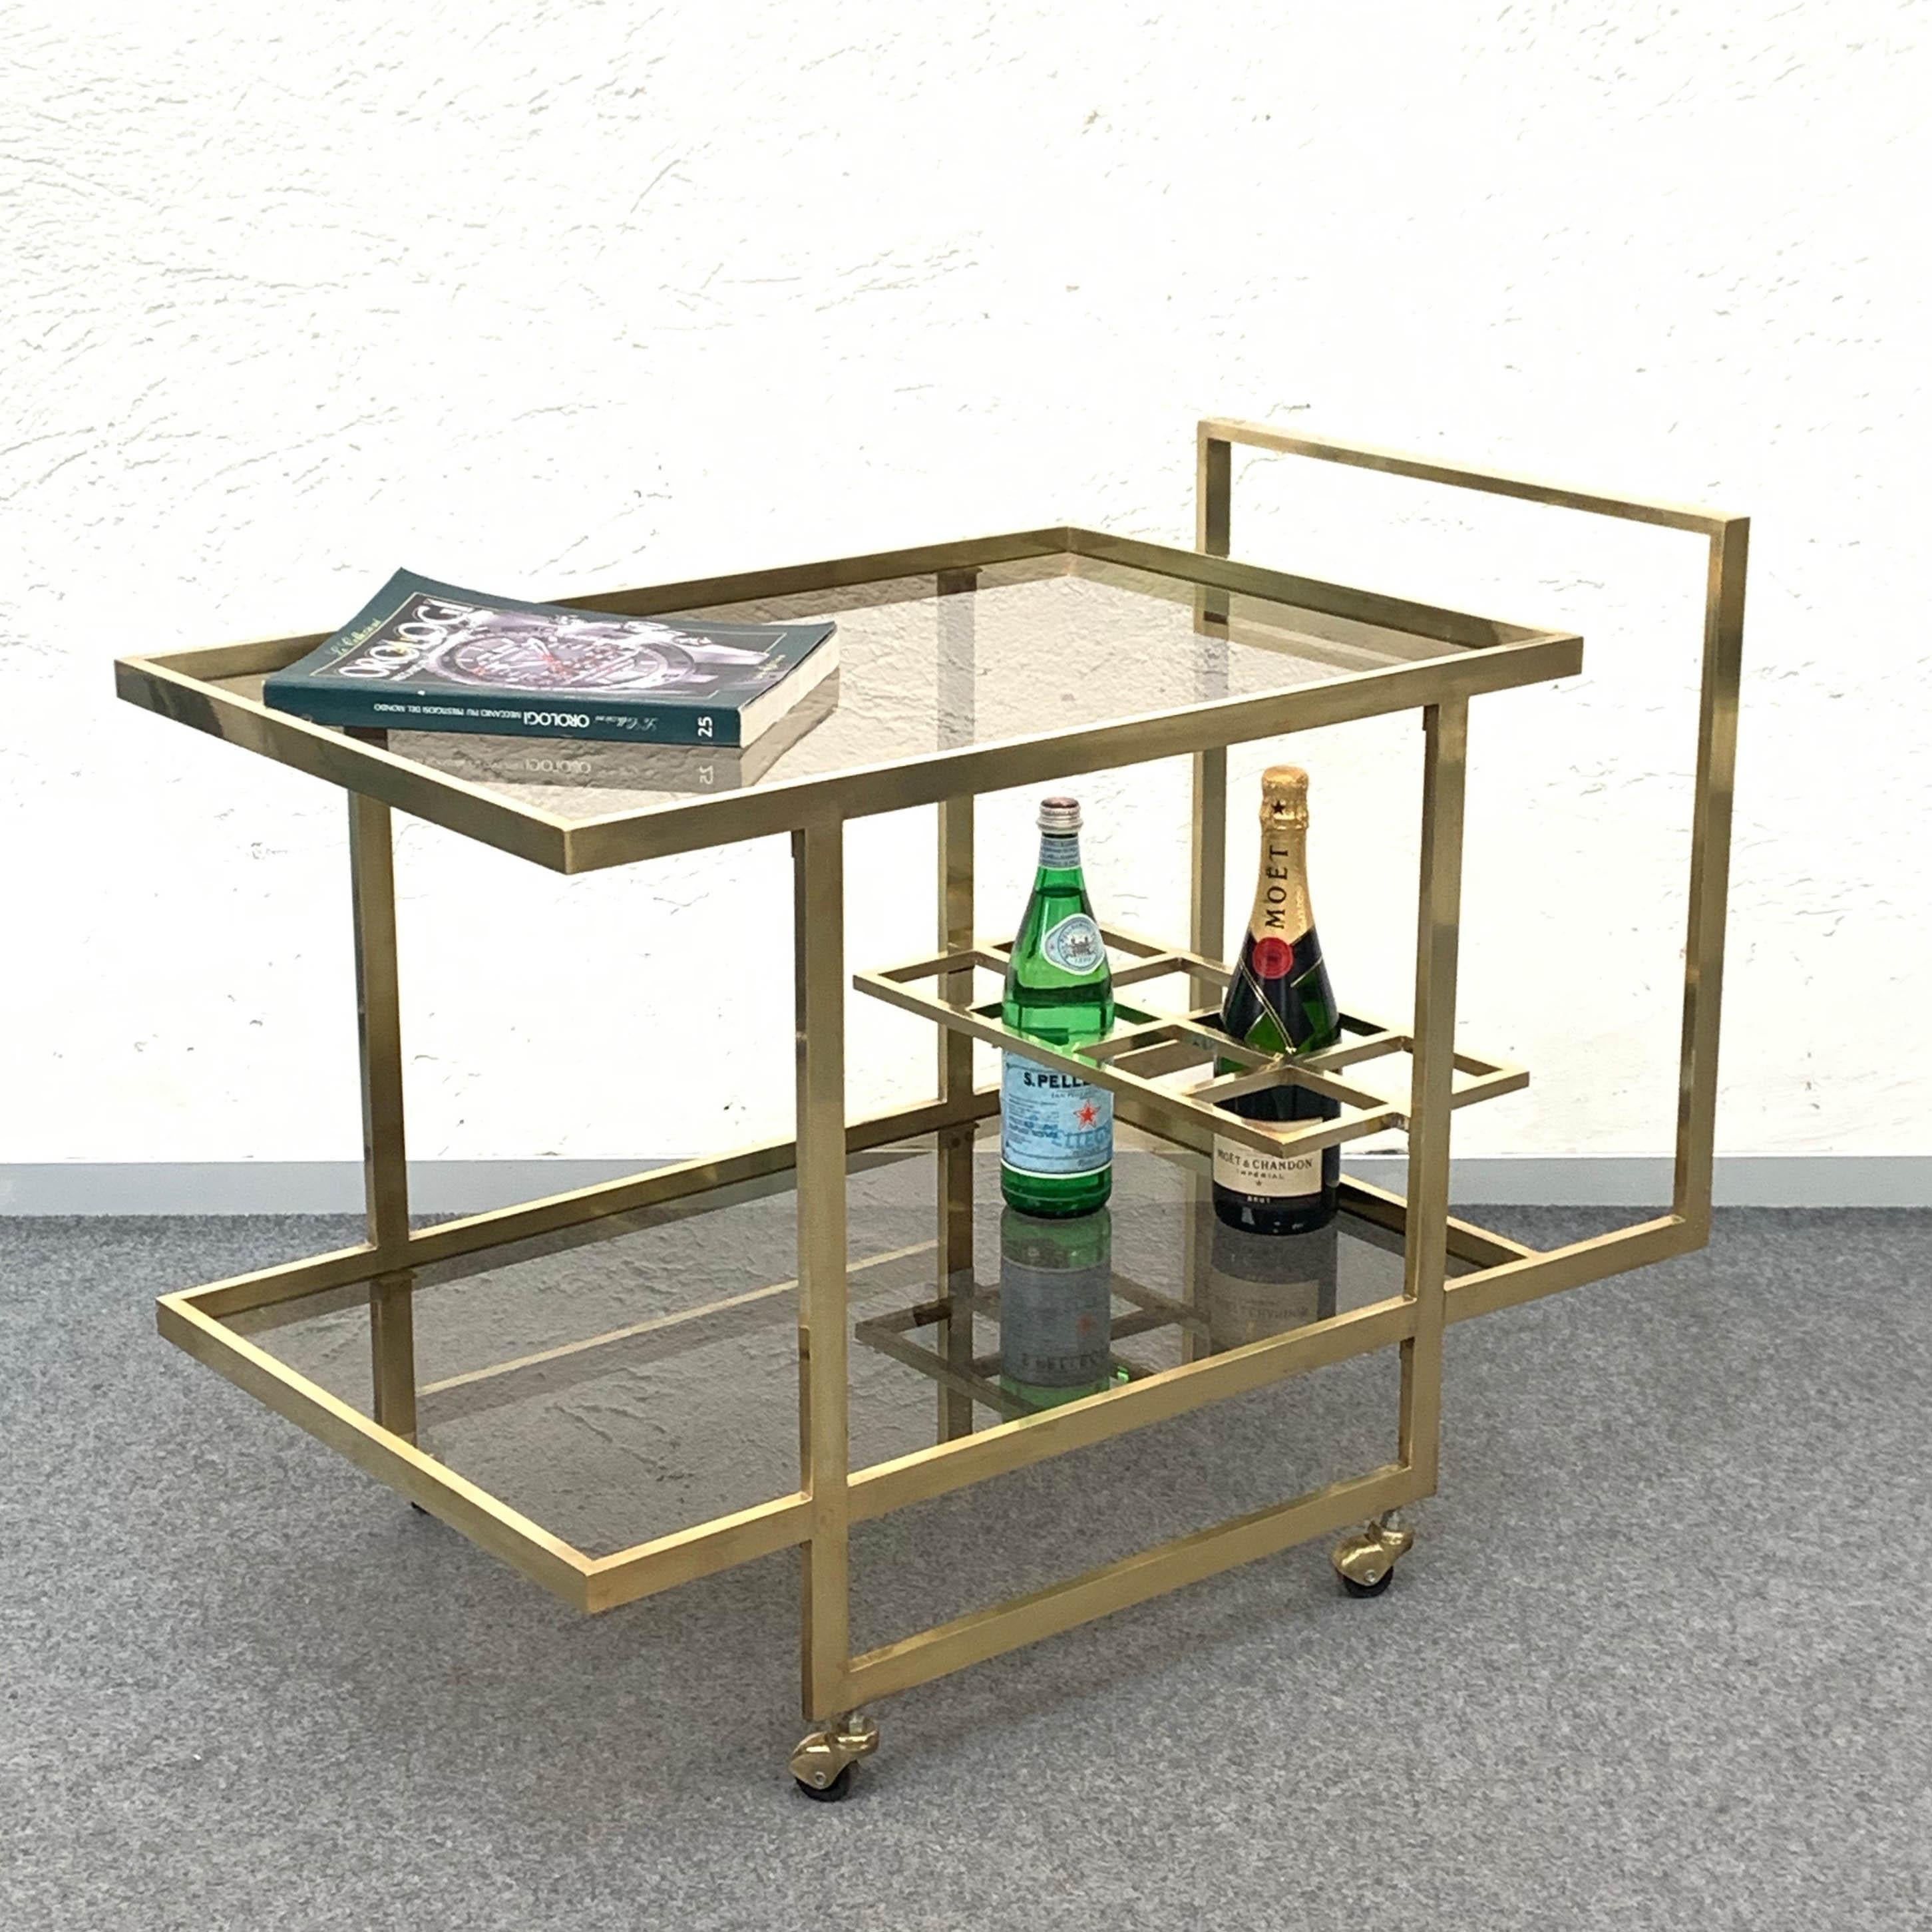 Midcentury Two Levels Smoked Glass and Brass Bar Cart with Bottle Holder, 1970s For Sale 3